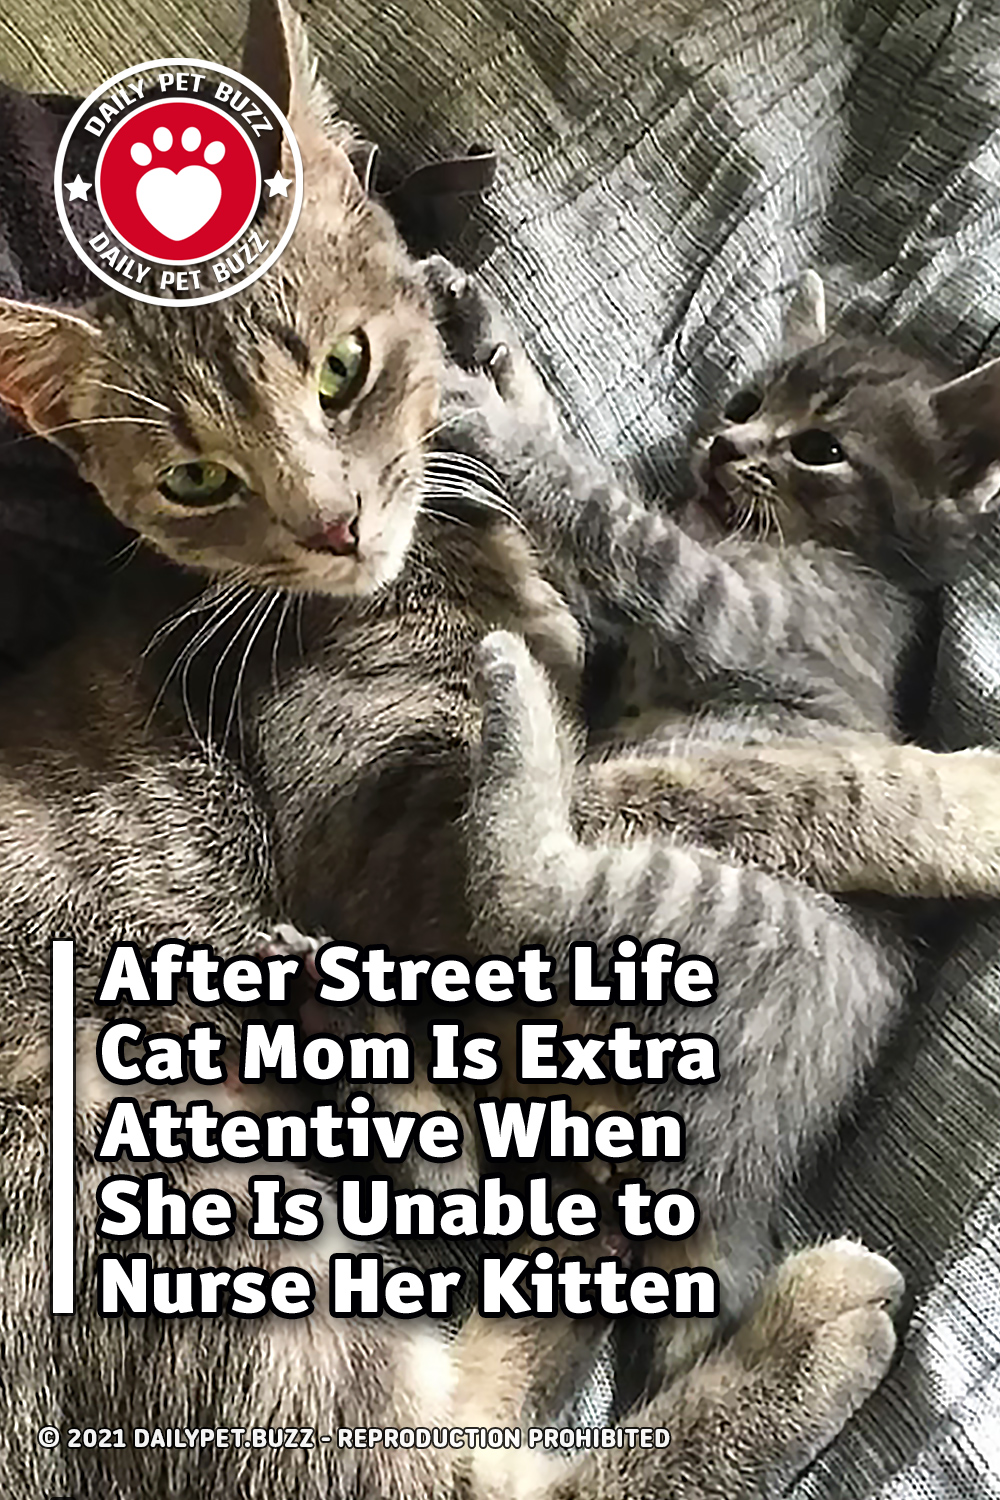 After Street Life Cat Mom Is Extra Attentive When She Is Unable to Nurse Her Kitten